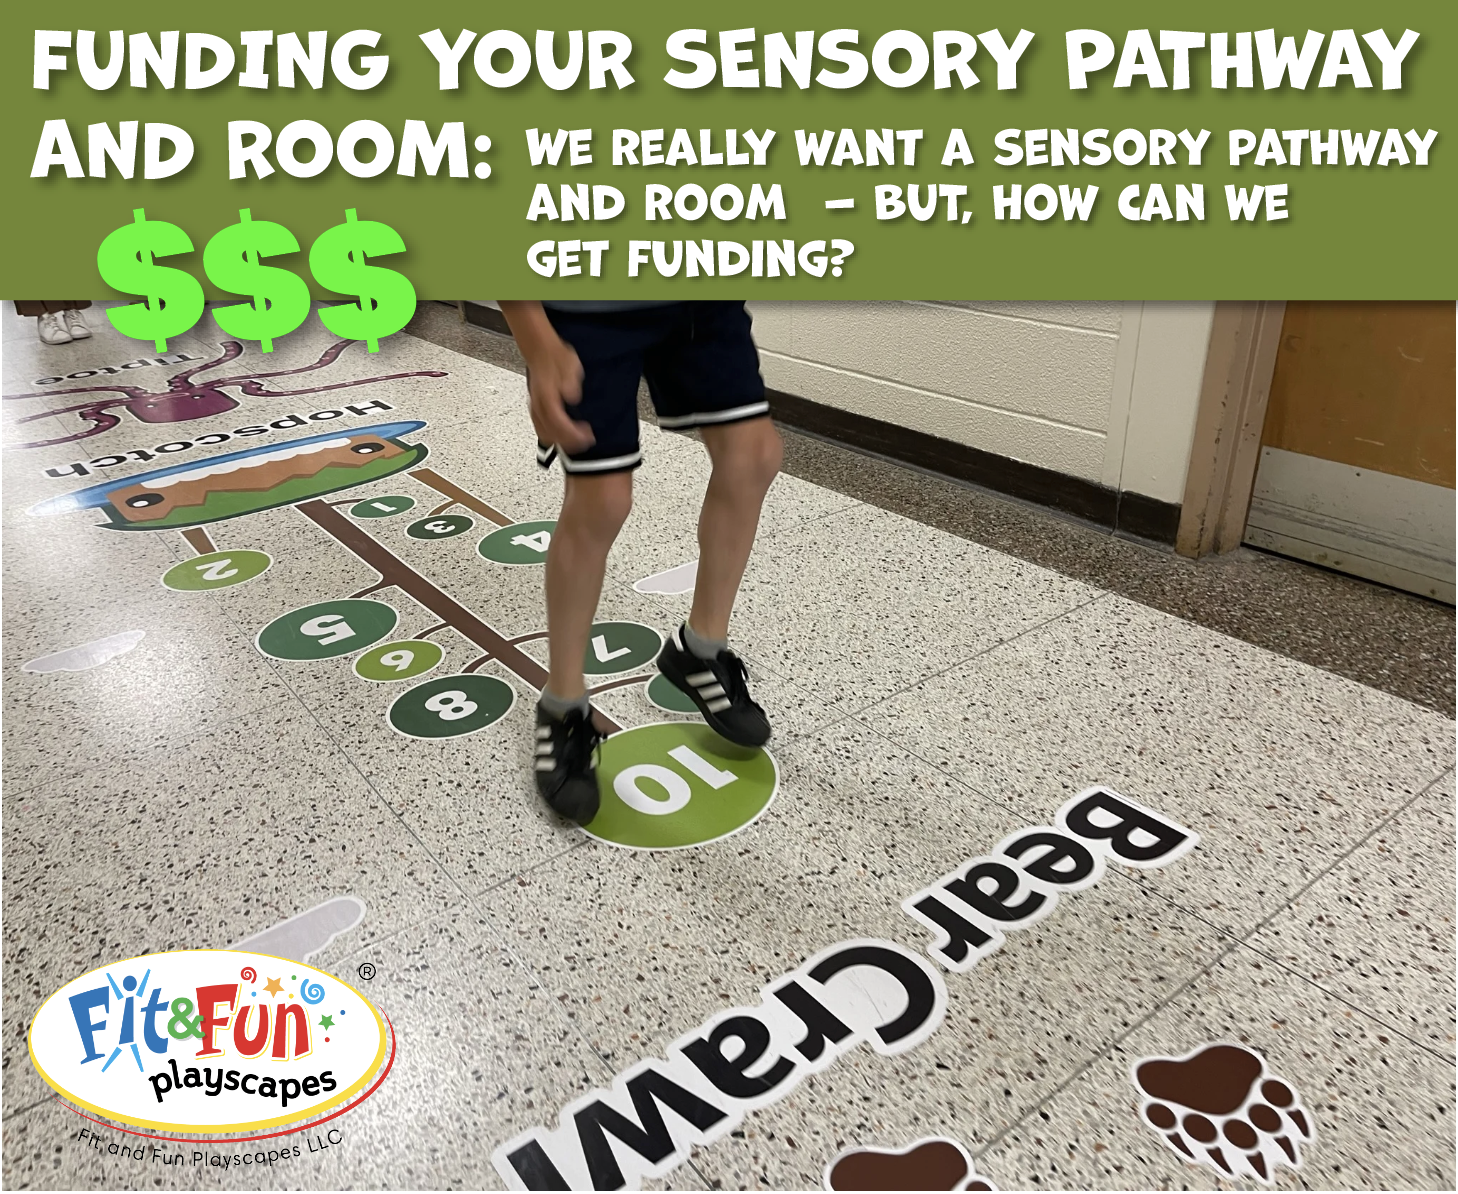 Fundraising to Finance Your Sensory Space